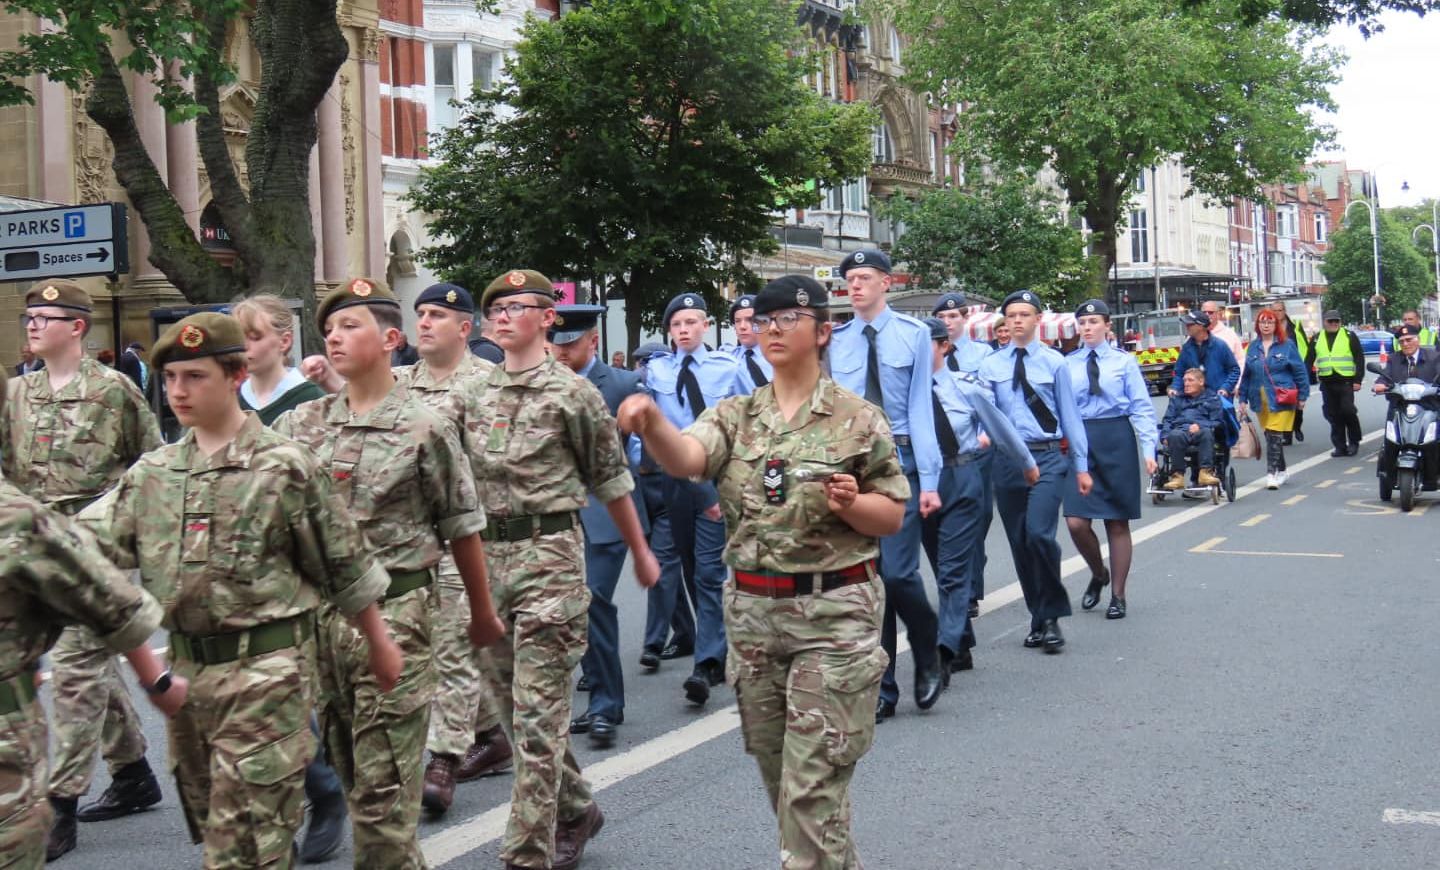 Southport Armed Forces Day parade 2022. Photo by Andrew Brown Stand Up For Southport